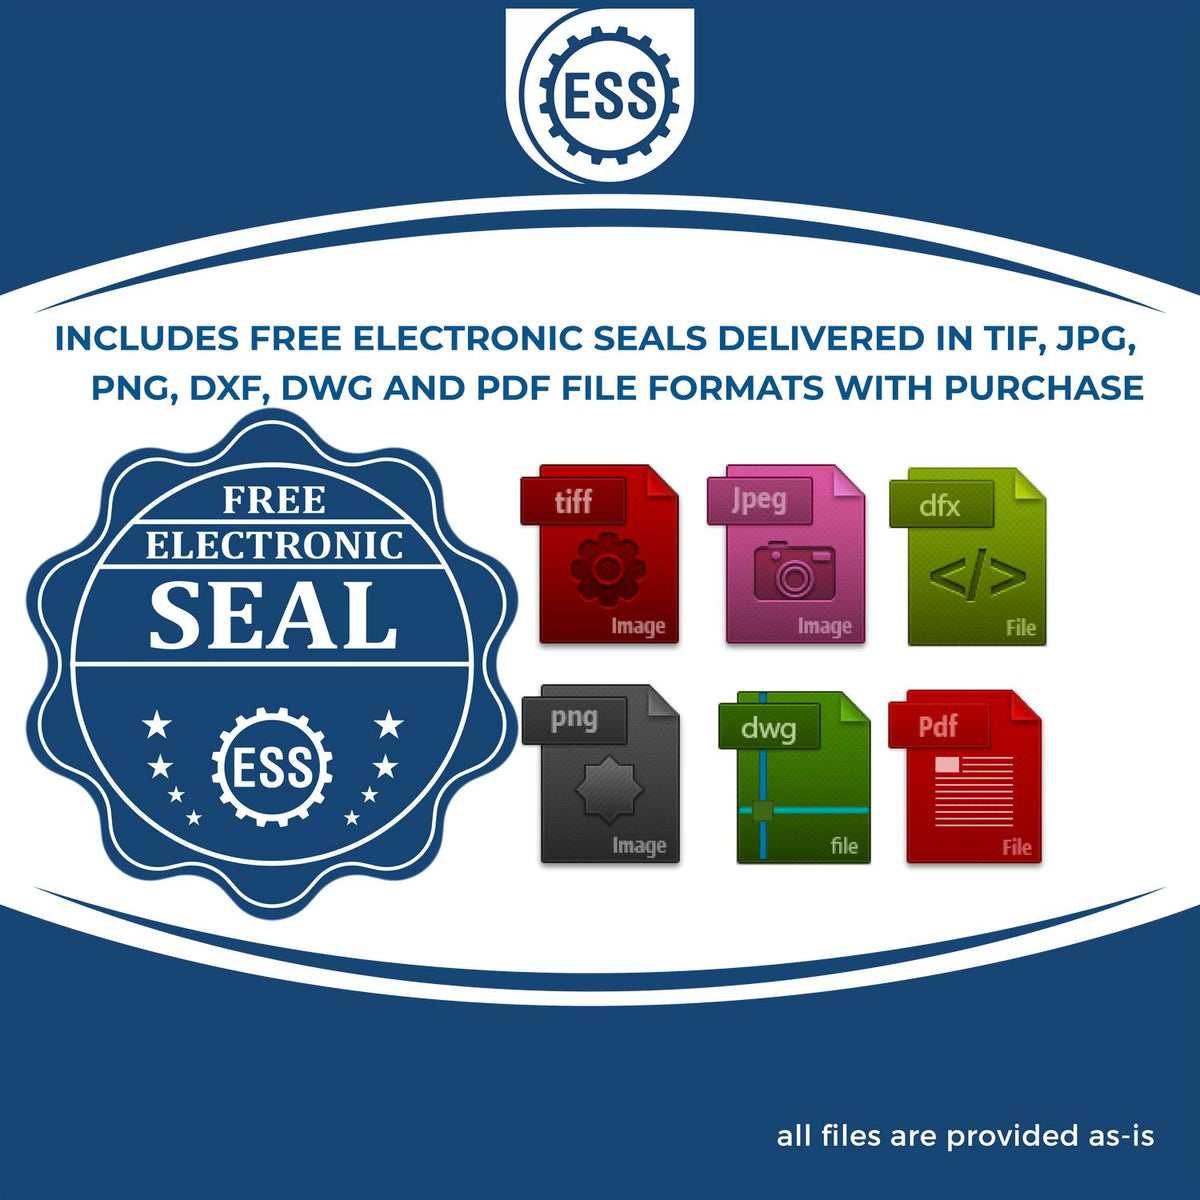 An infographic for the free electronic seal for the Gift Guam Land Surveyor Seal illustrating the different file type icons such as DXF, DWG, TIF, JPG and PNG.